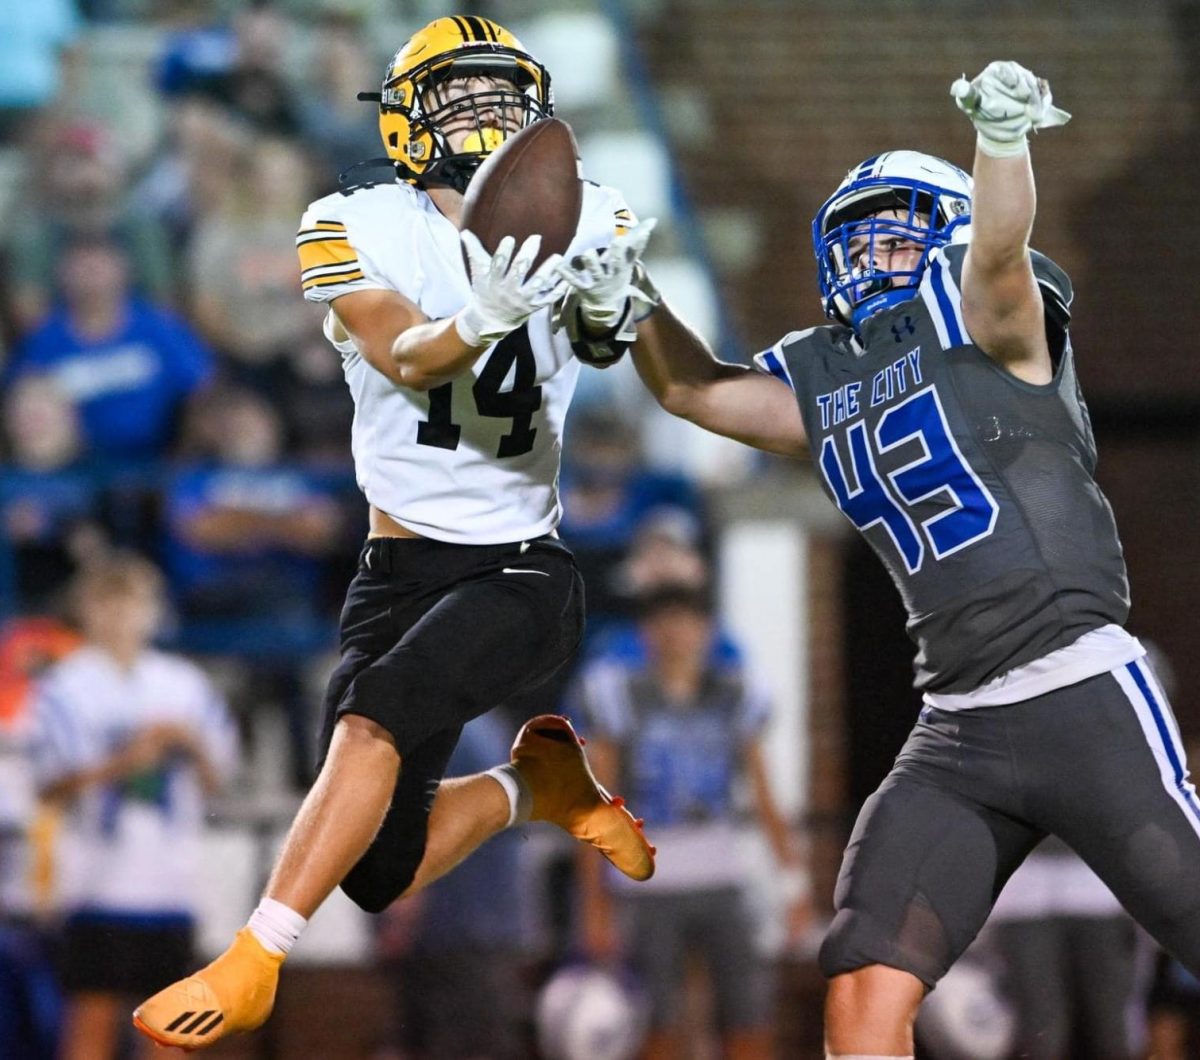 Middlesboro receiver Jack Yoakum went up for a catch in Fridays game at Gate City, Va.